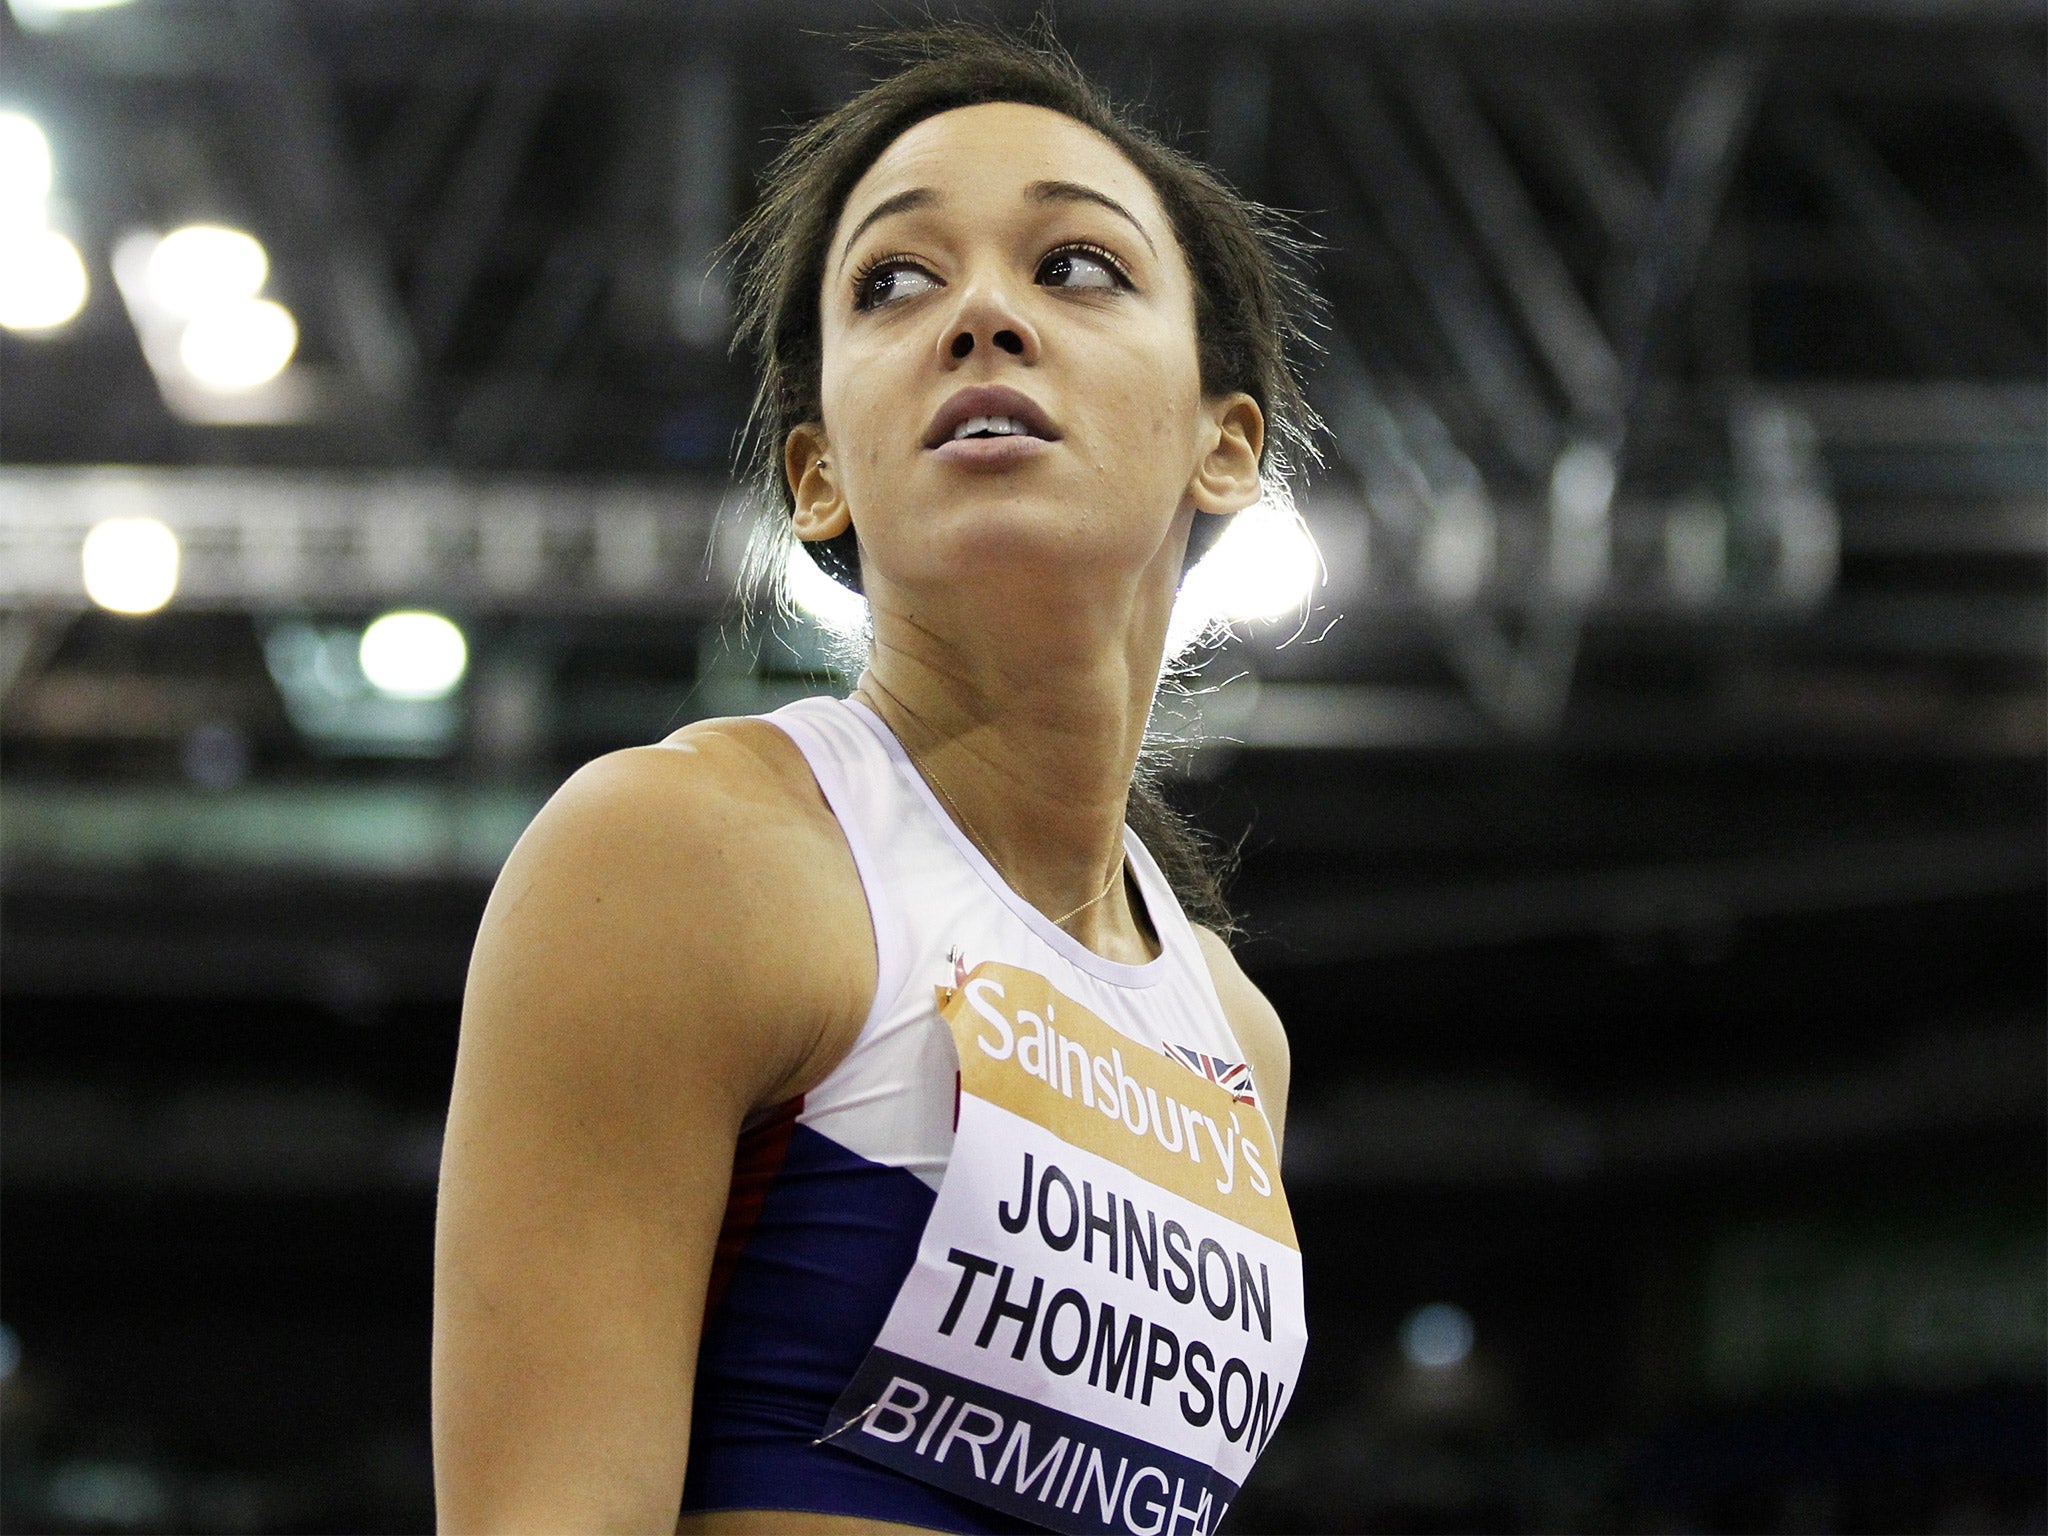 Katarina Johnson-Thompson is ranked No 2 in the world in the long jump